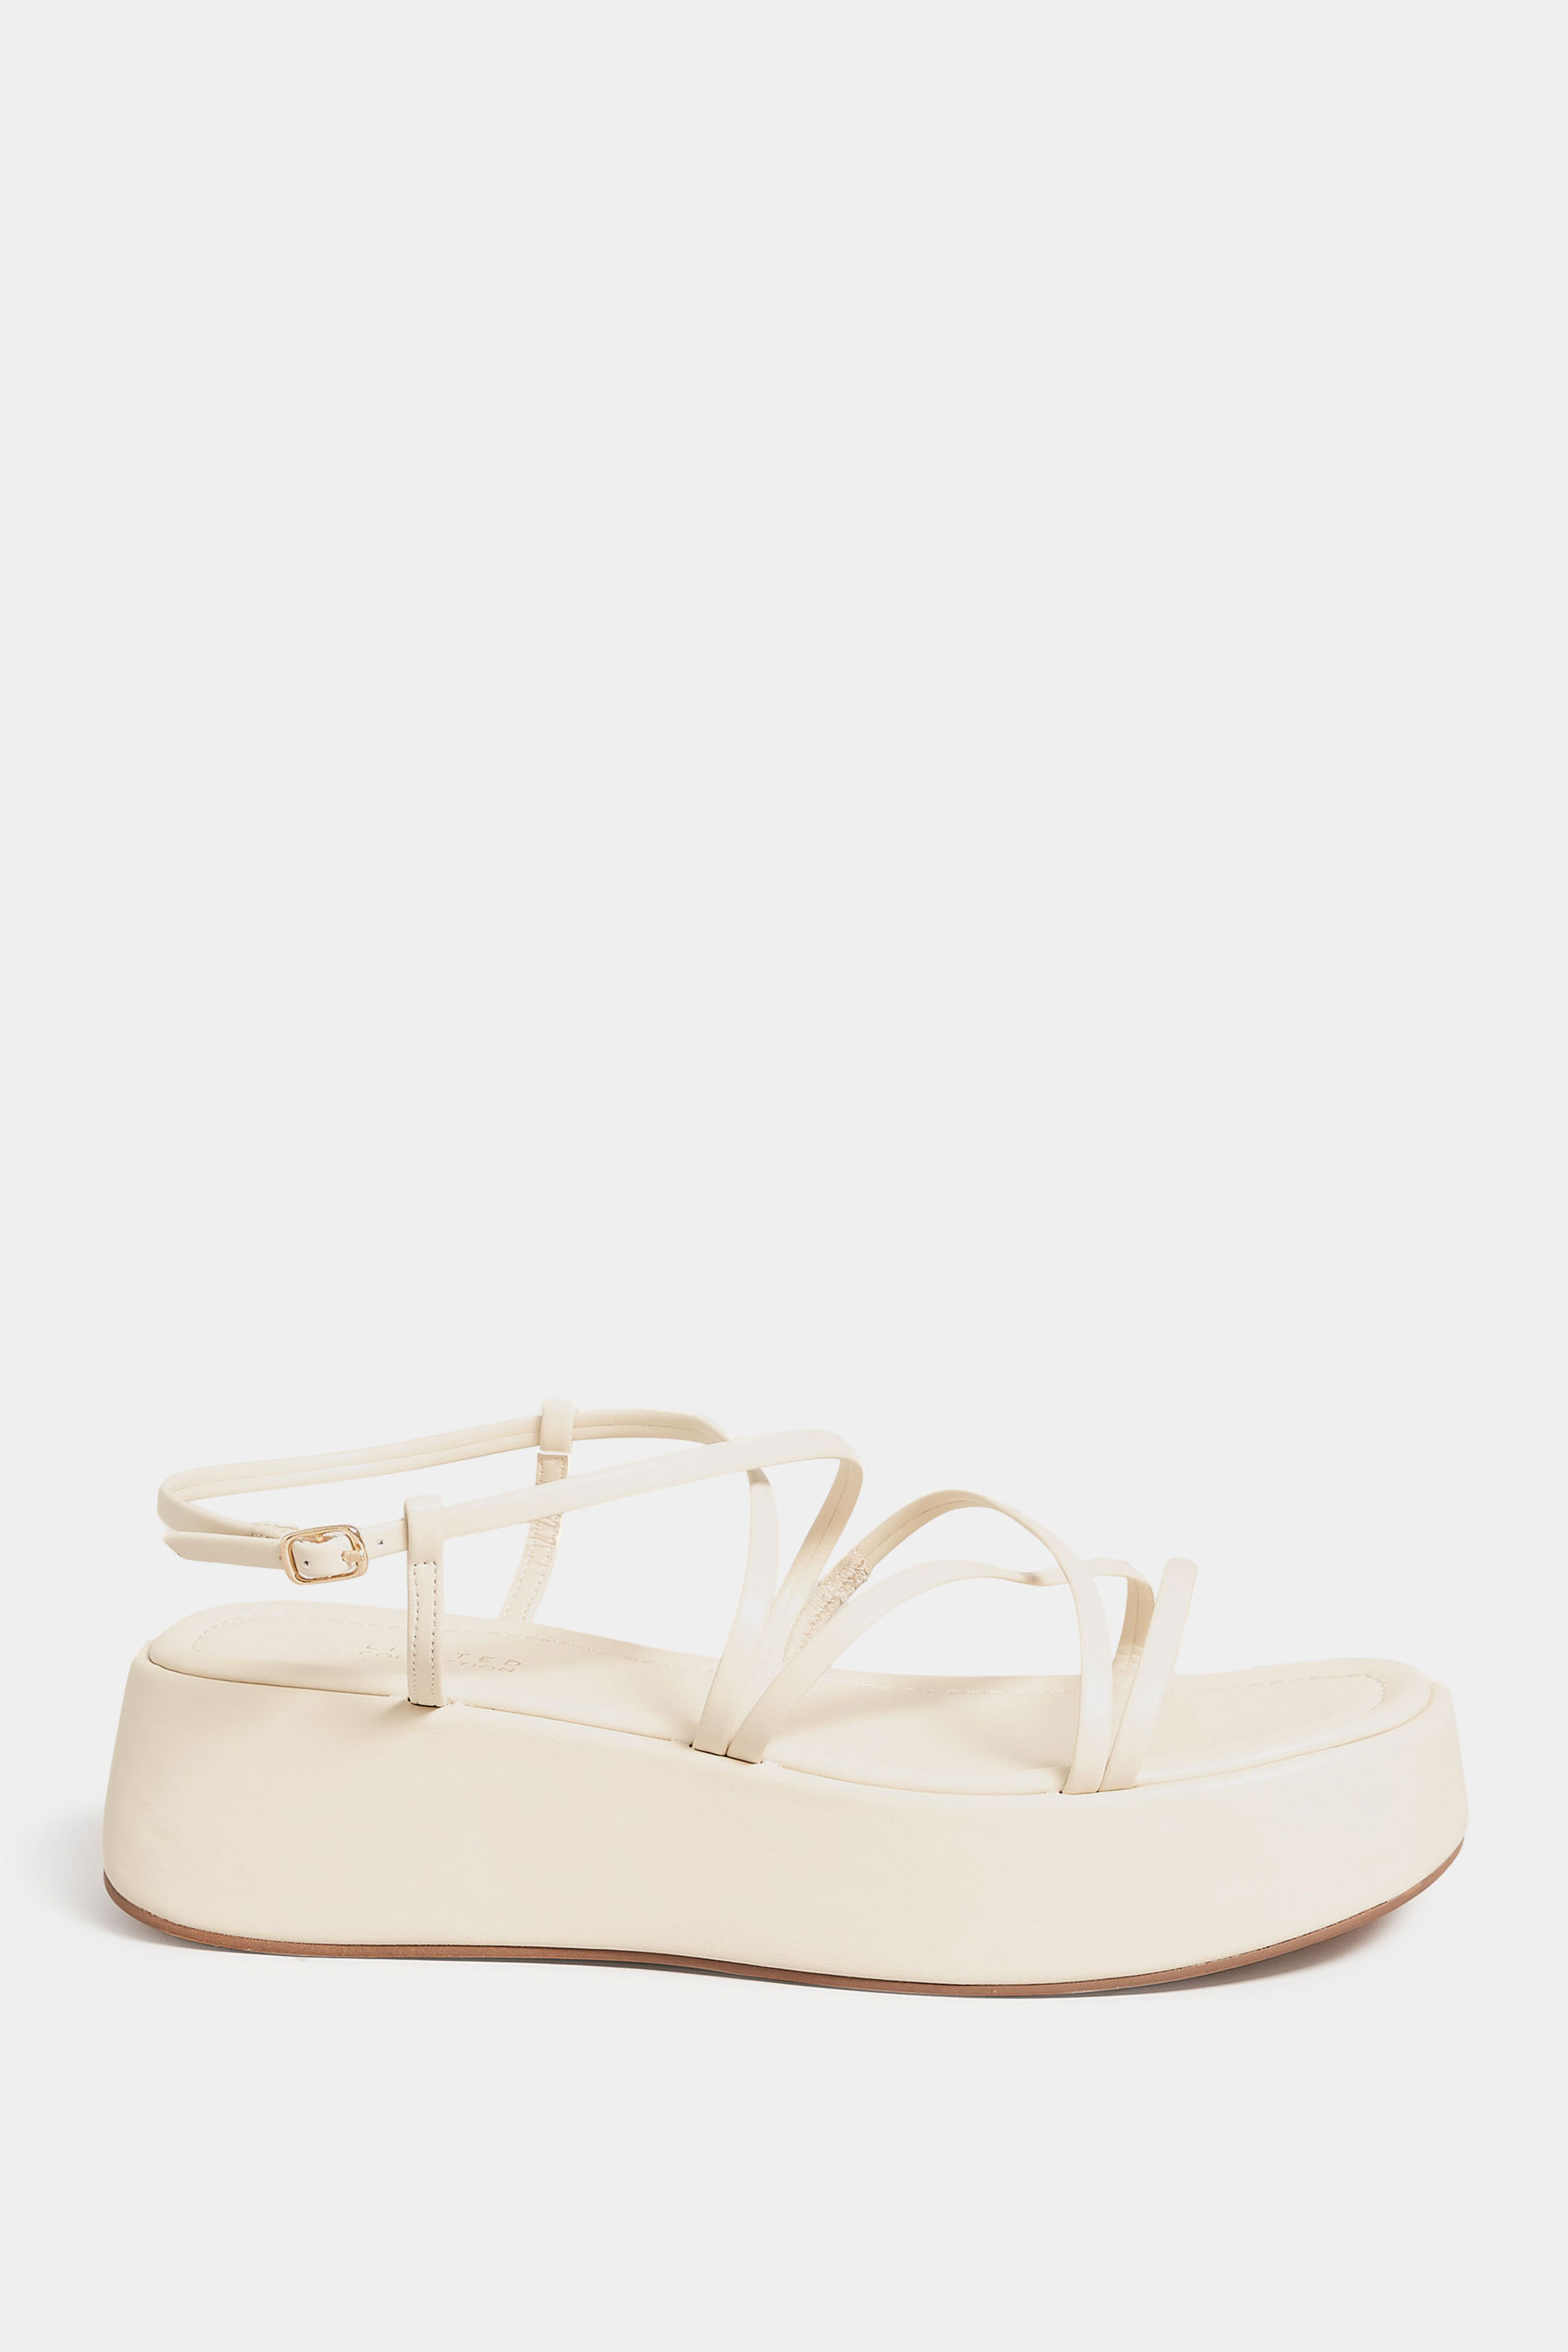 LIMITED COLLECTION White Strappy Flatform Sandals in Extra Wide EEE Fit